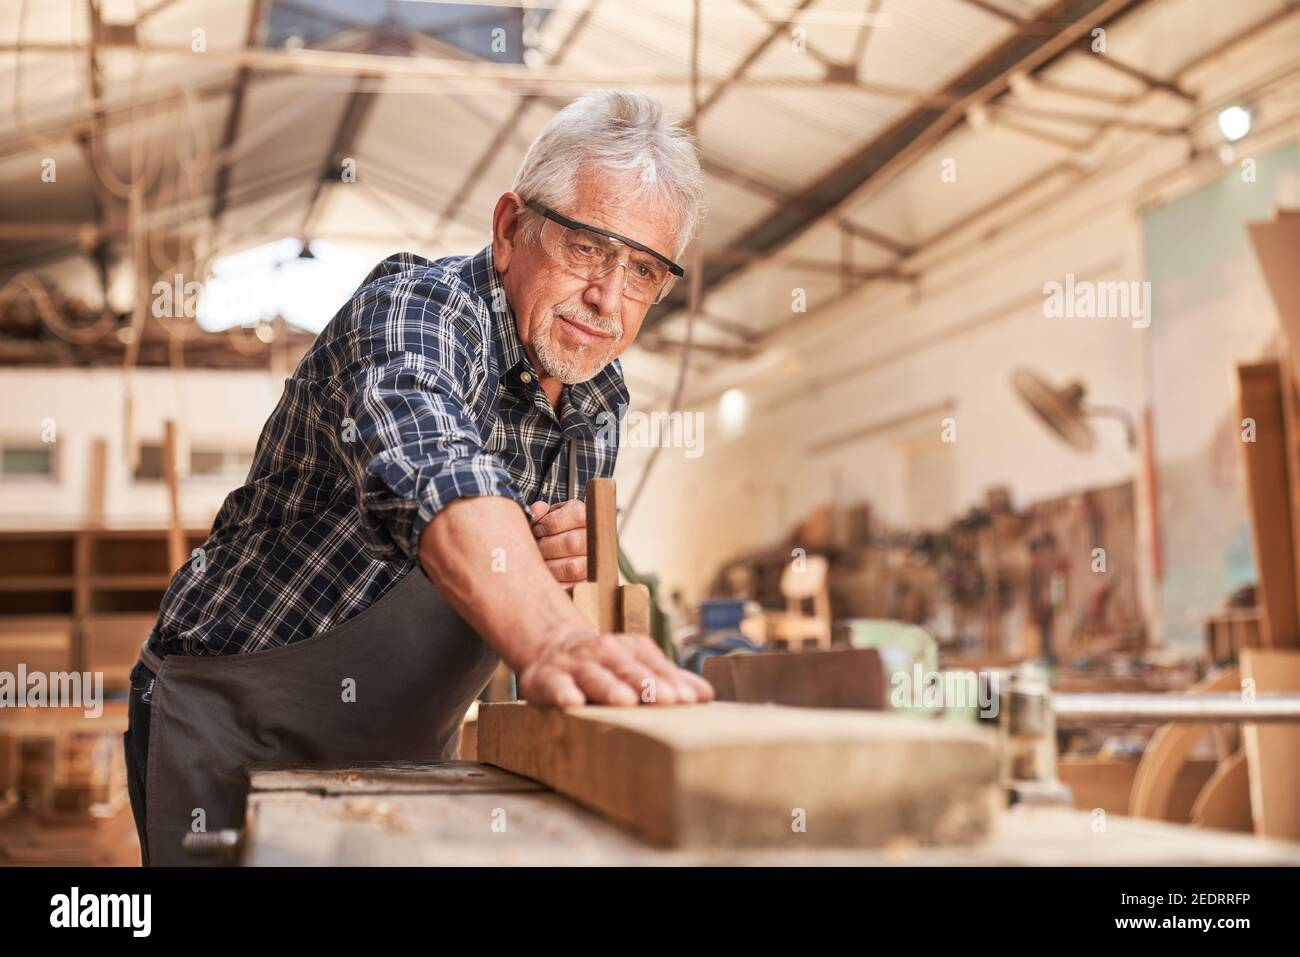 Craftsmen as carpenter master planing wood in the joinery or joinery Stock Photo